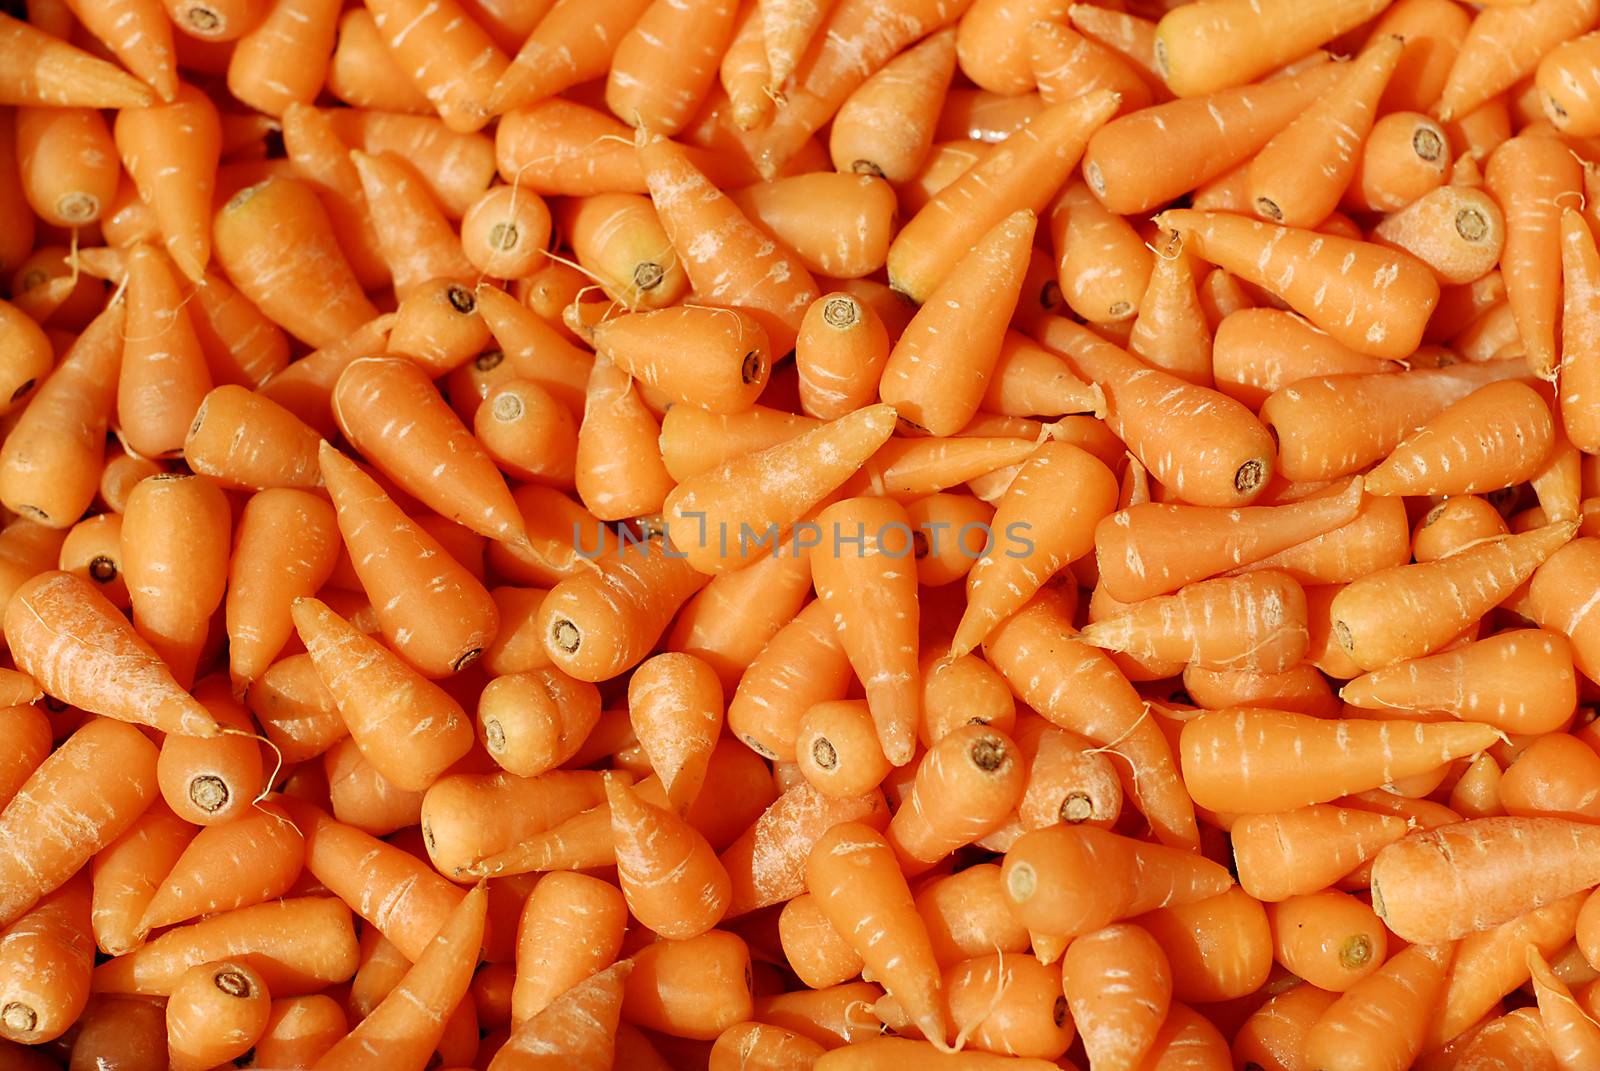 A closeup shot of fresh young carrots for sale in a marketplace